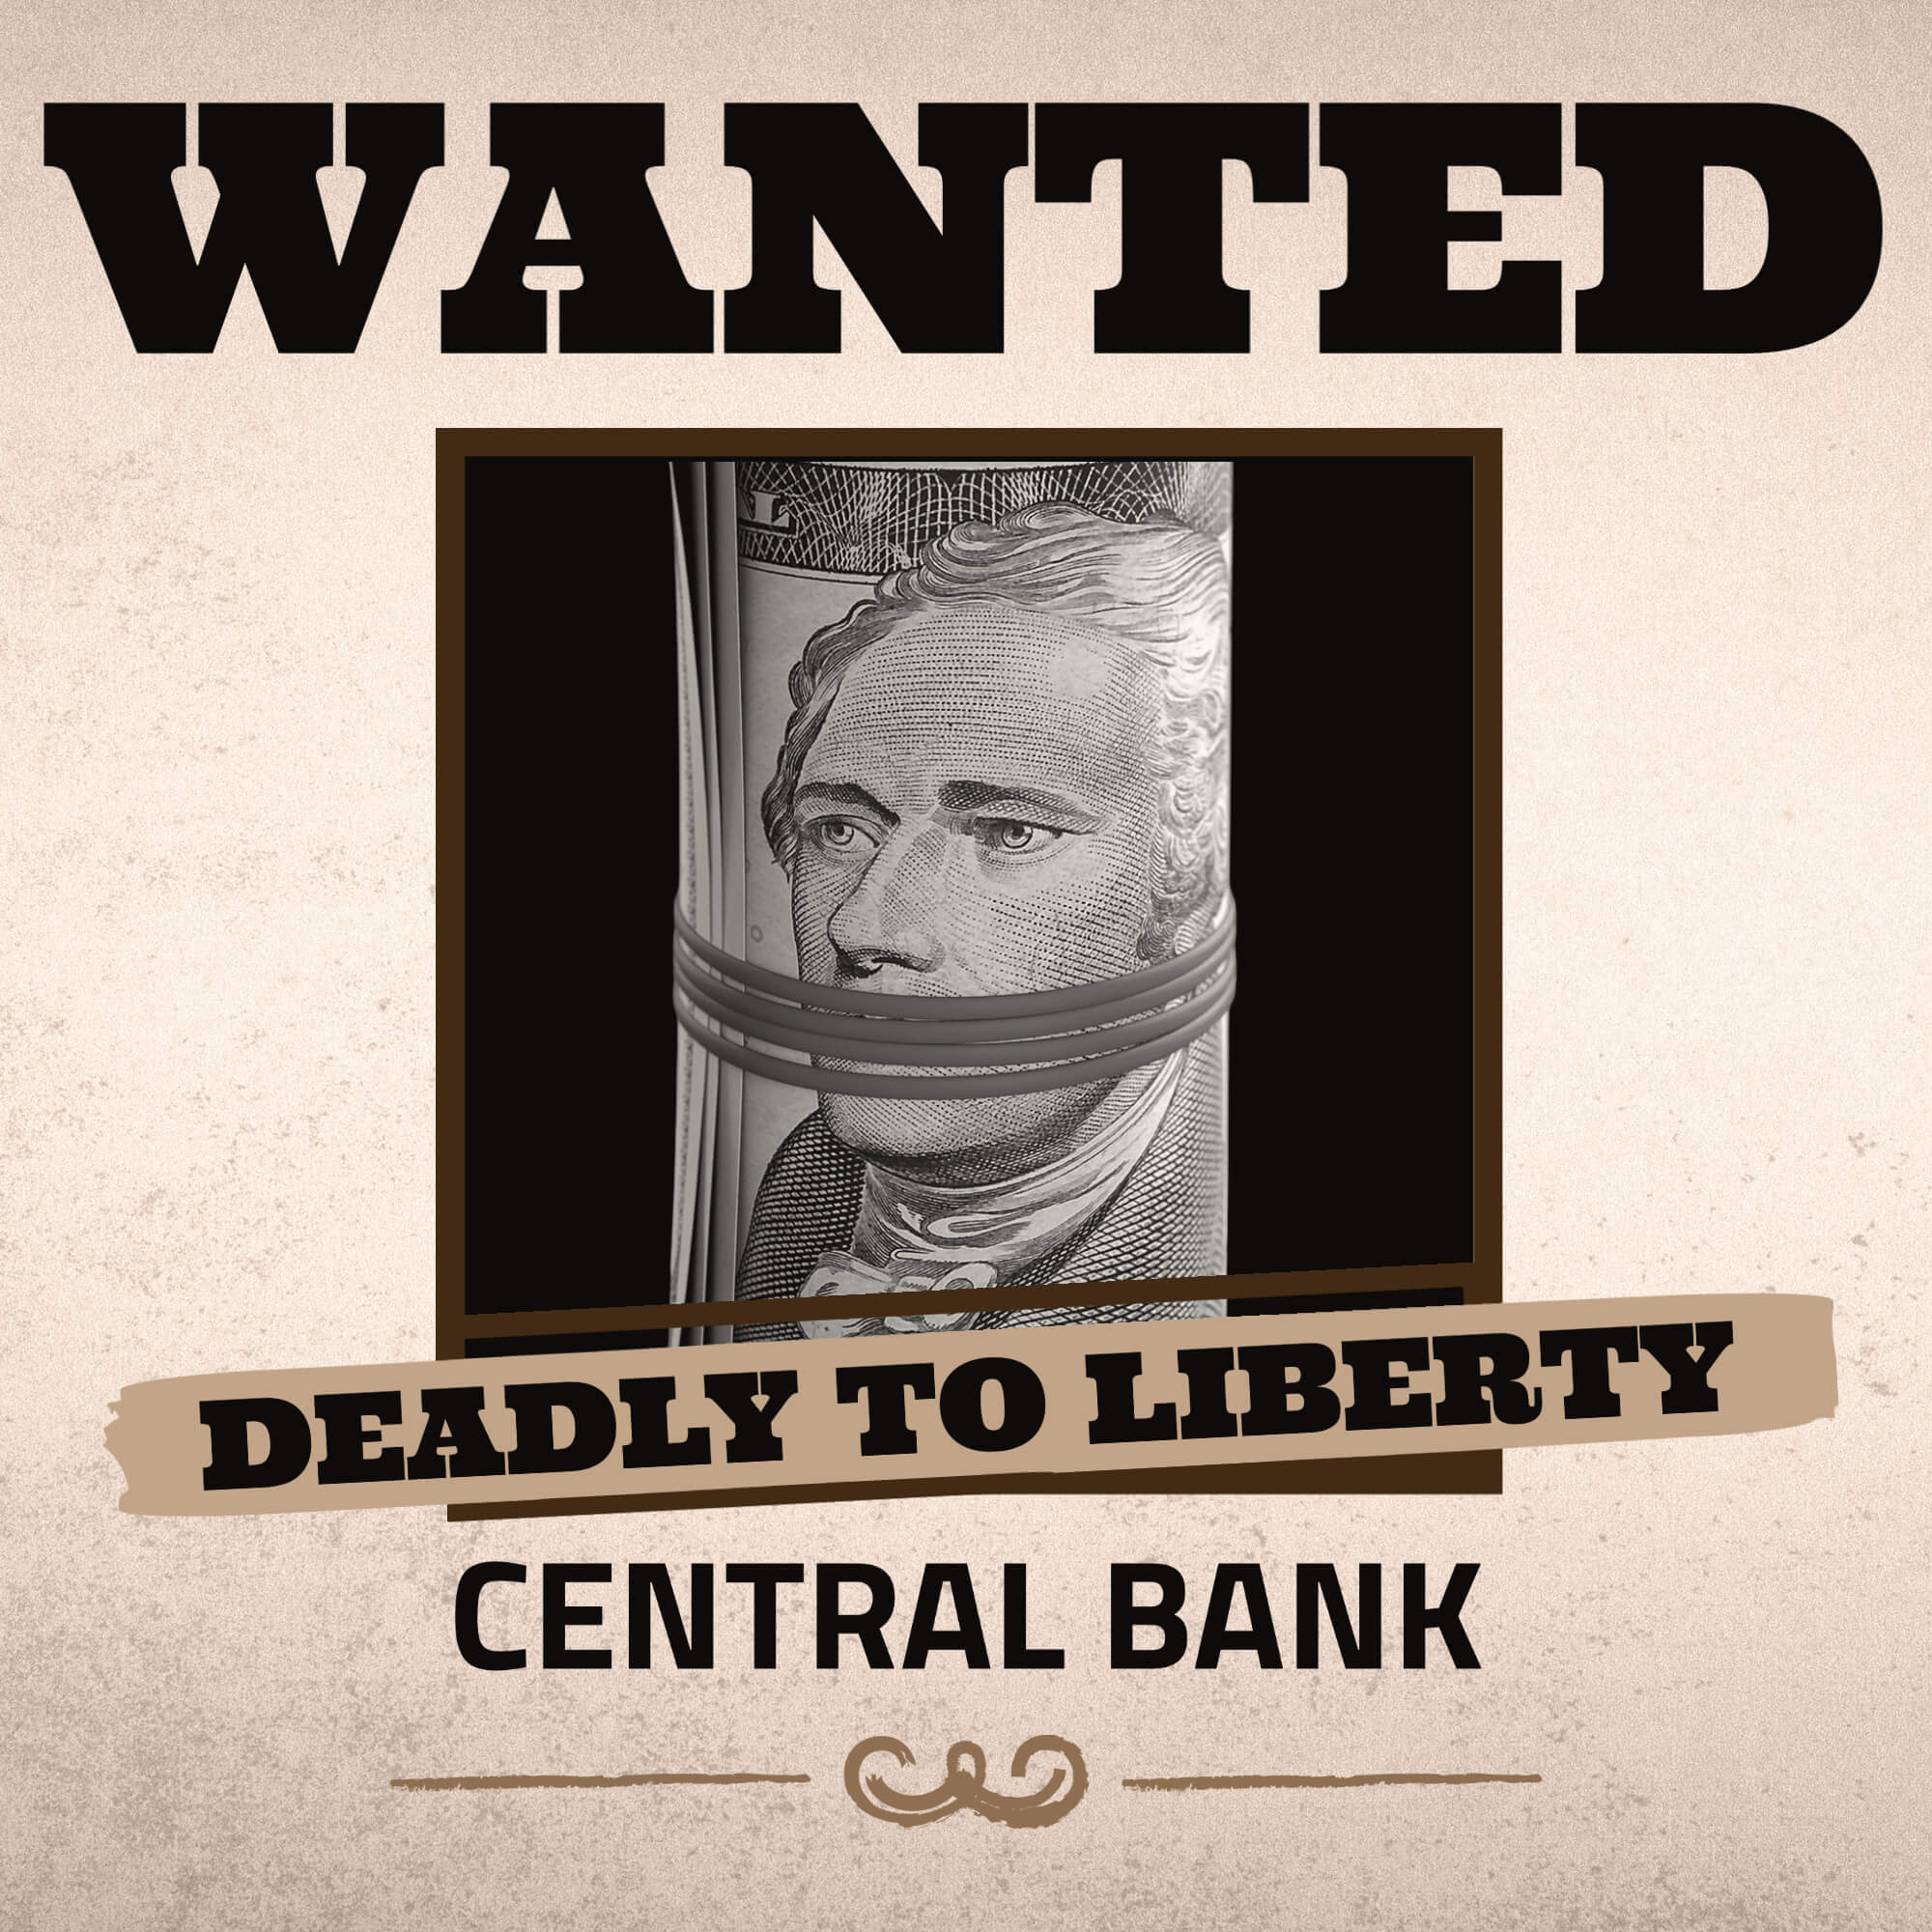 The Central Bank vs the Constitution